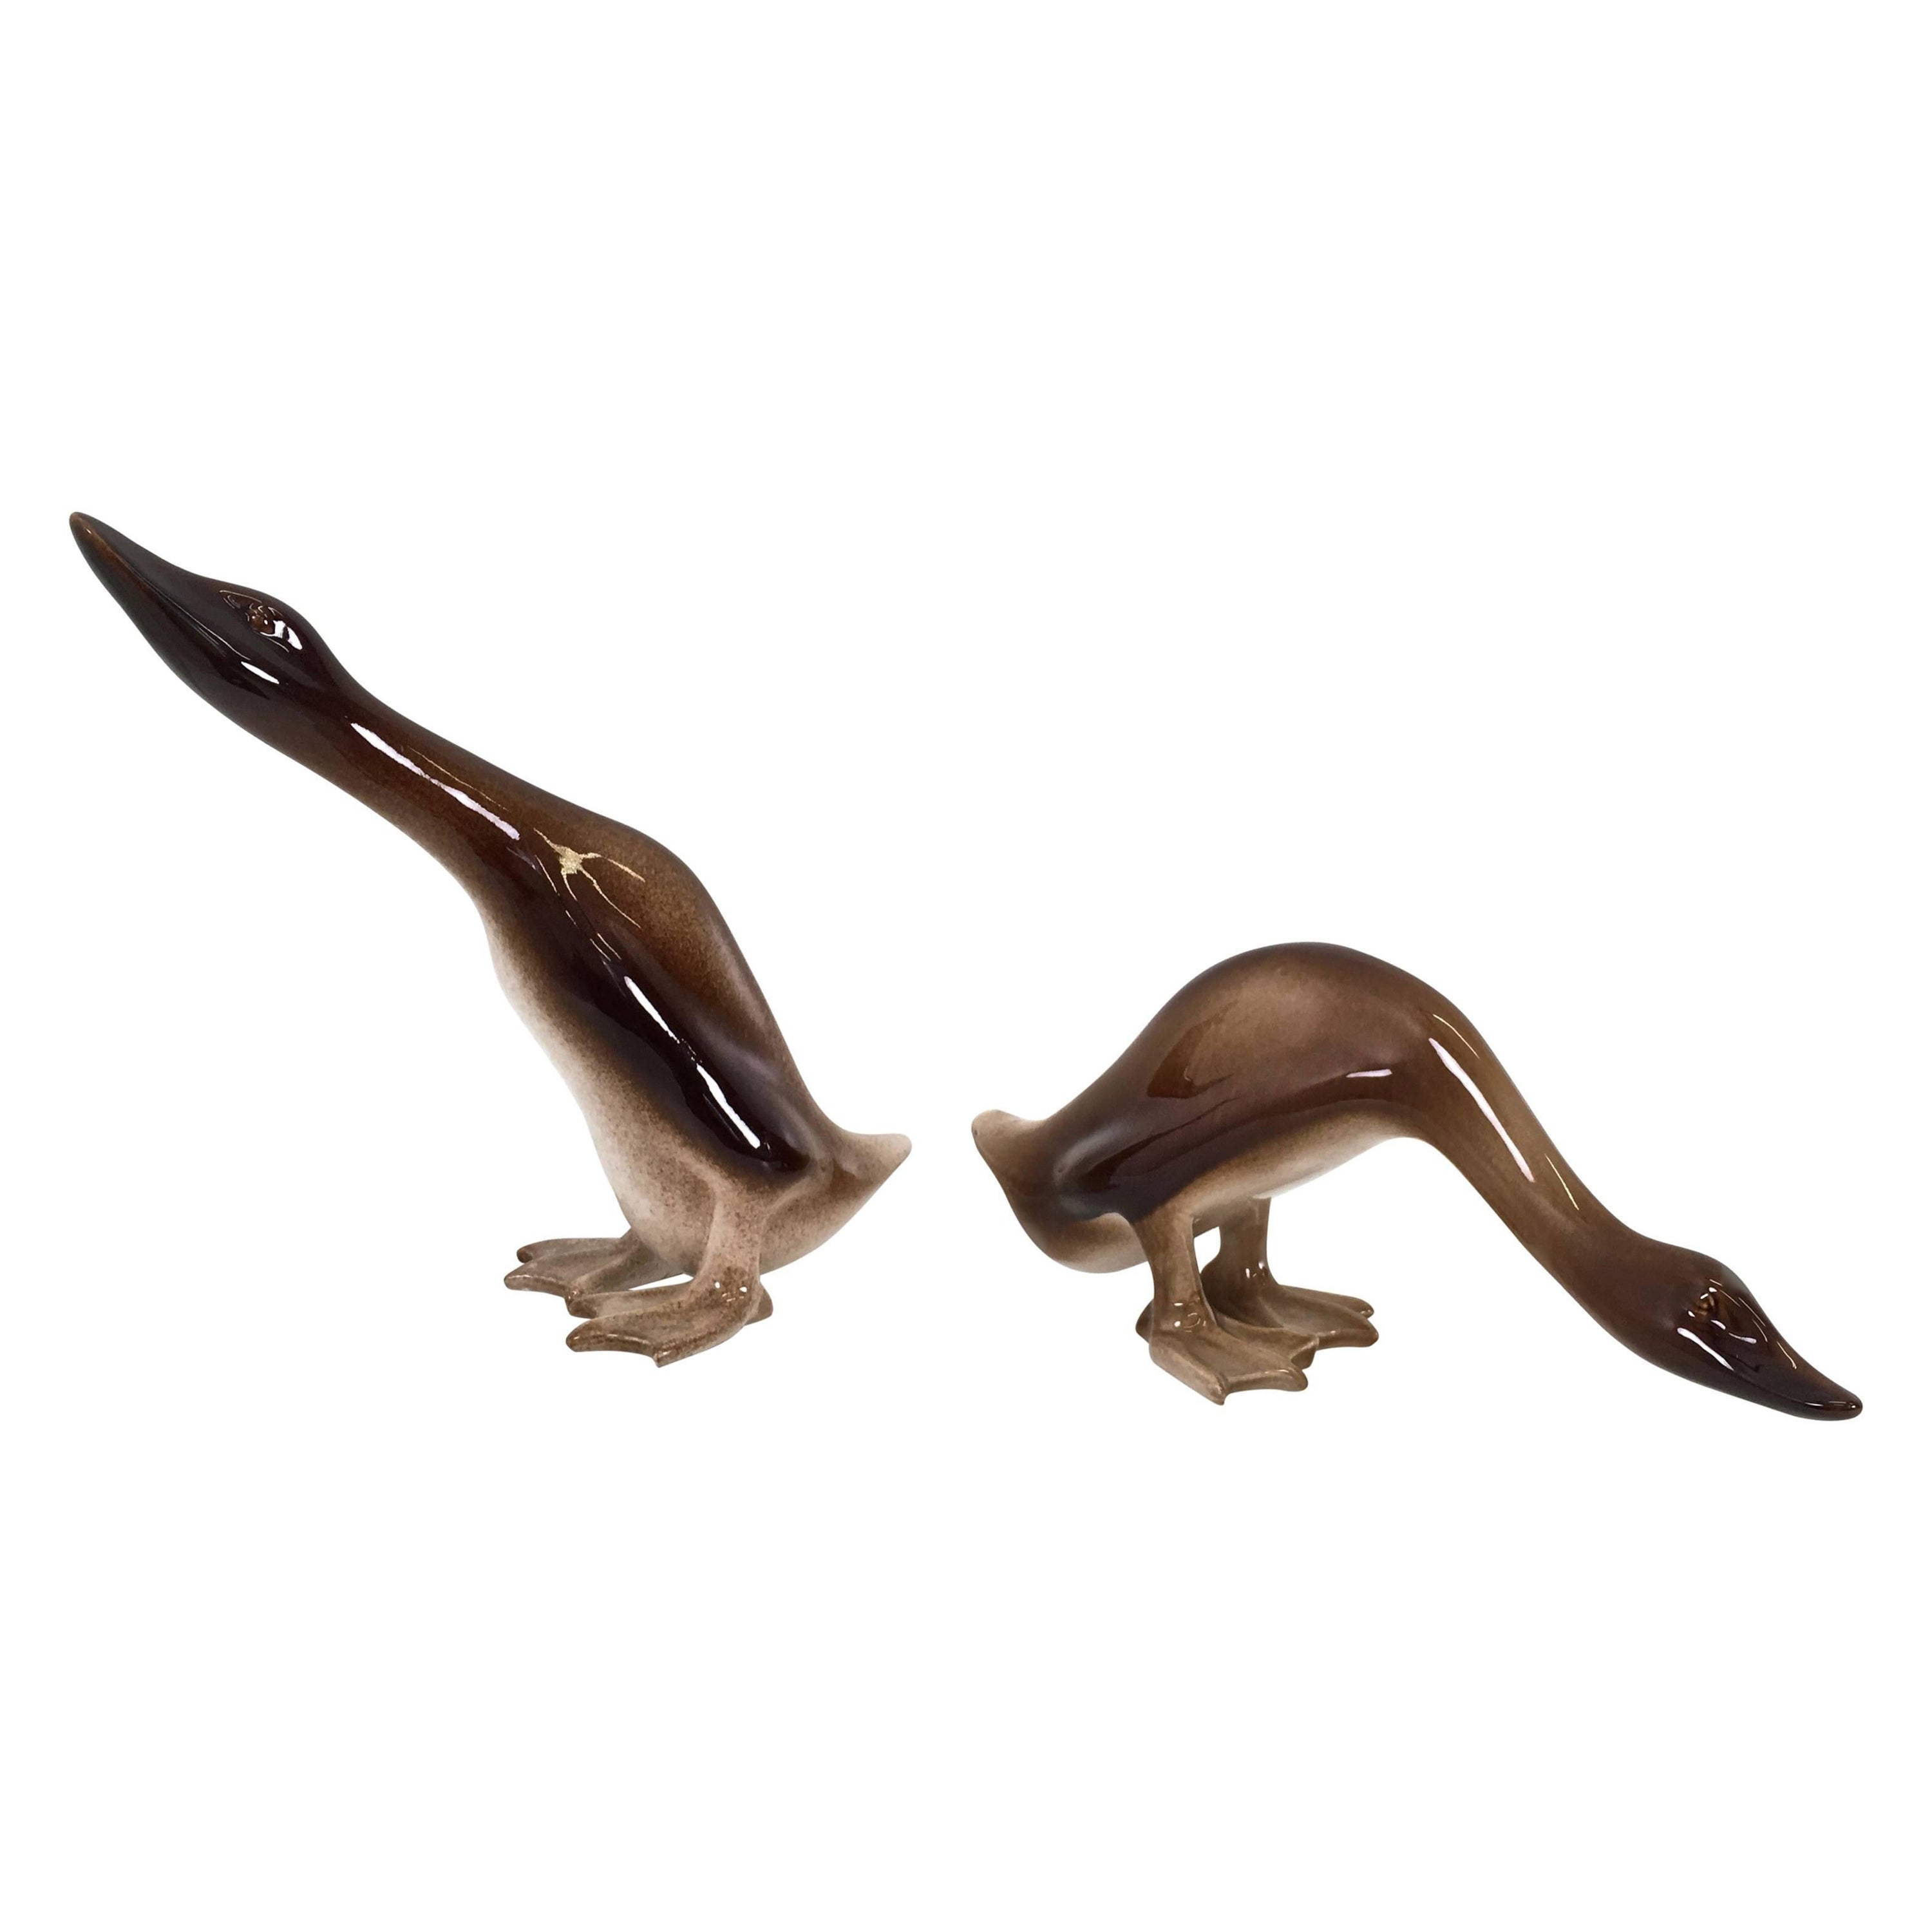 Pair of Airbrushed Ceramic Ducks Decorative Objects by Ugo Zaccagnini, Italy For Sale